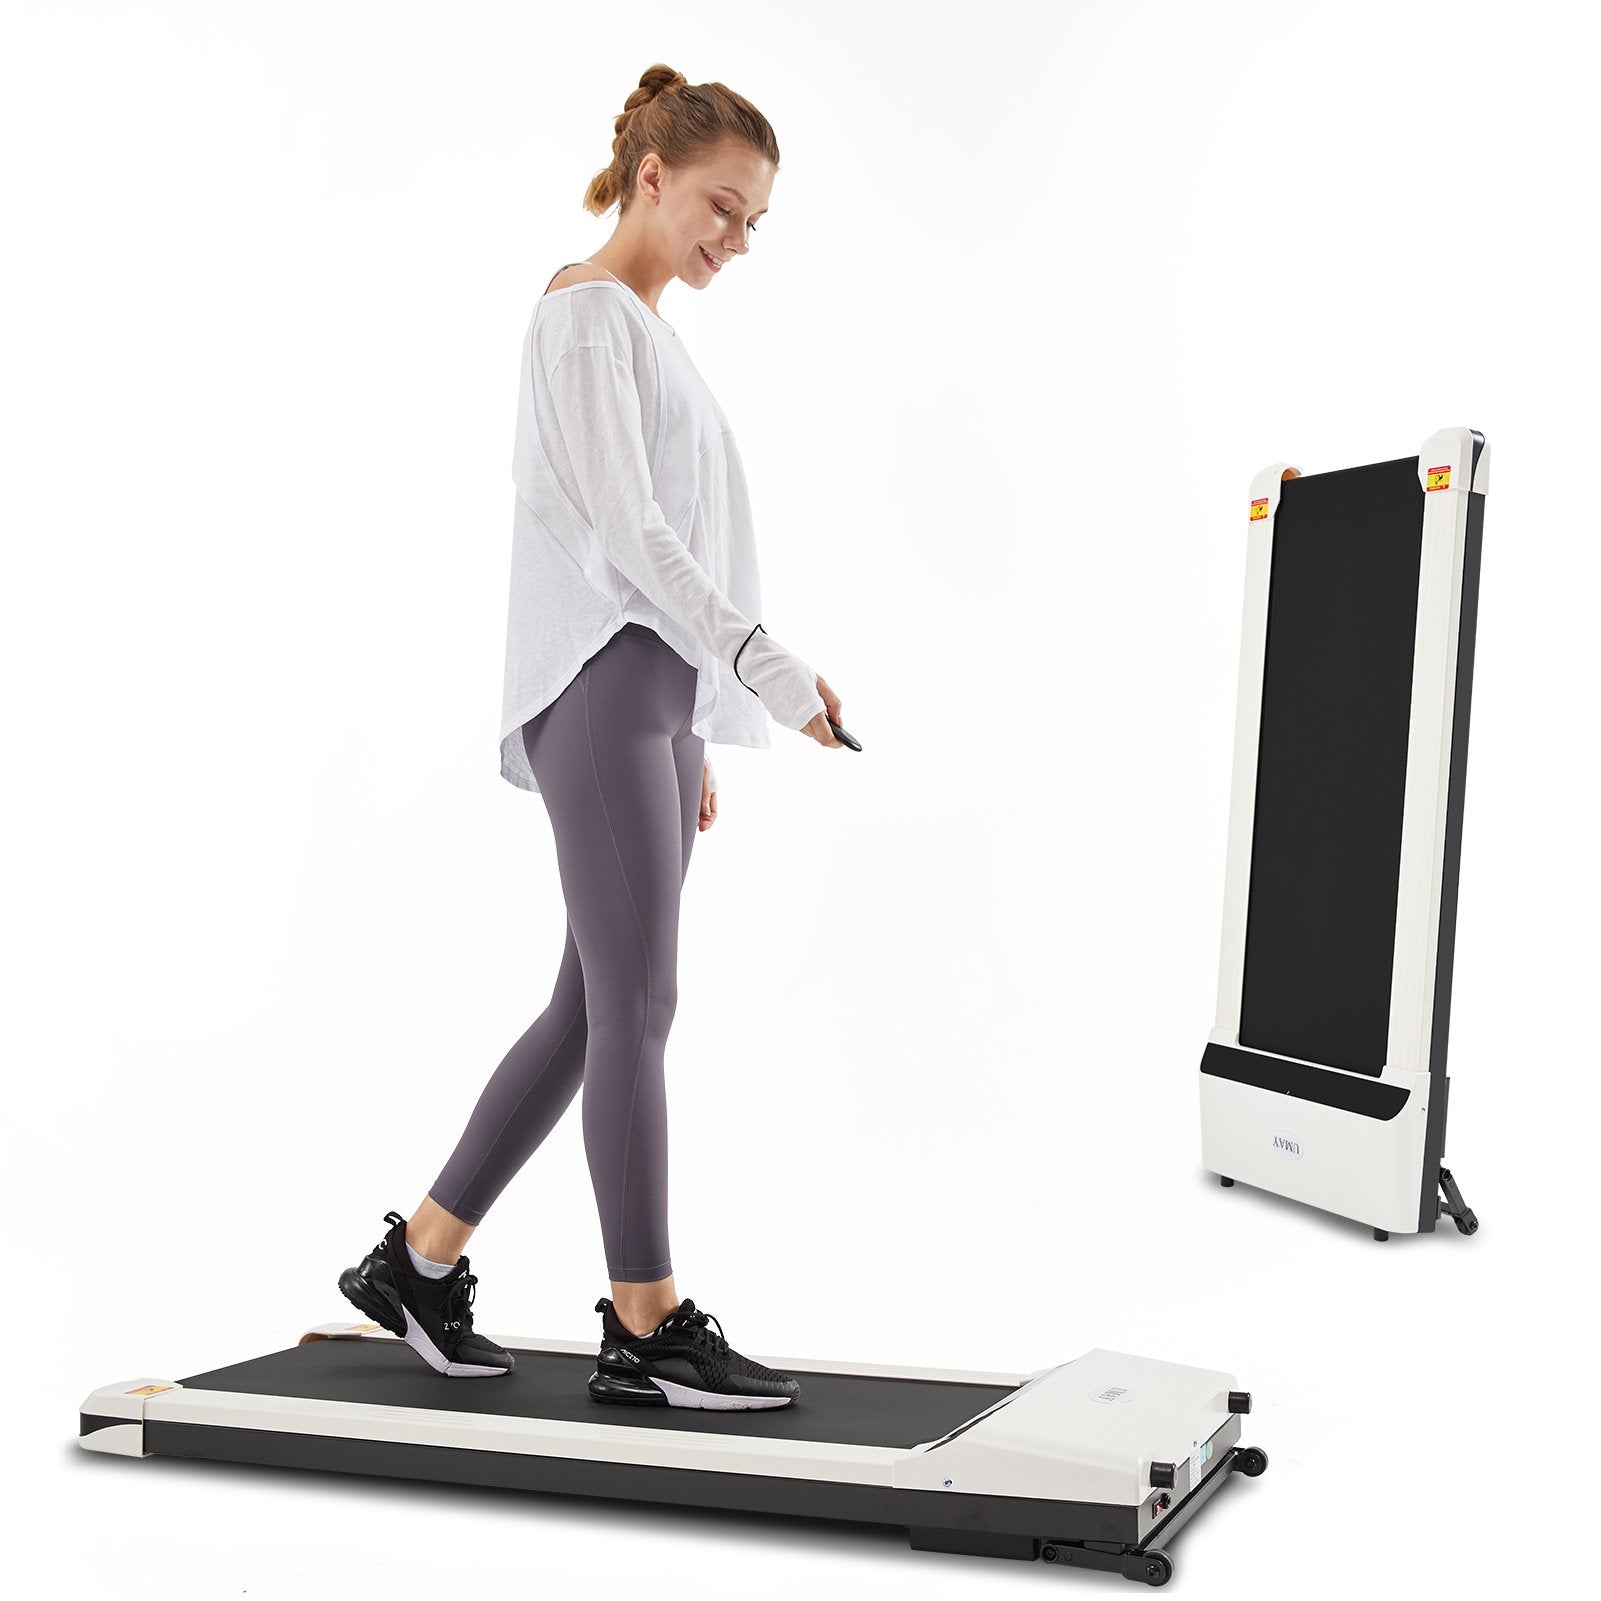 UMAY® foldable electric treadmill + SPAX professional fitness course